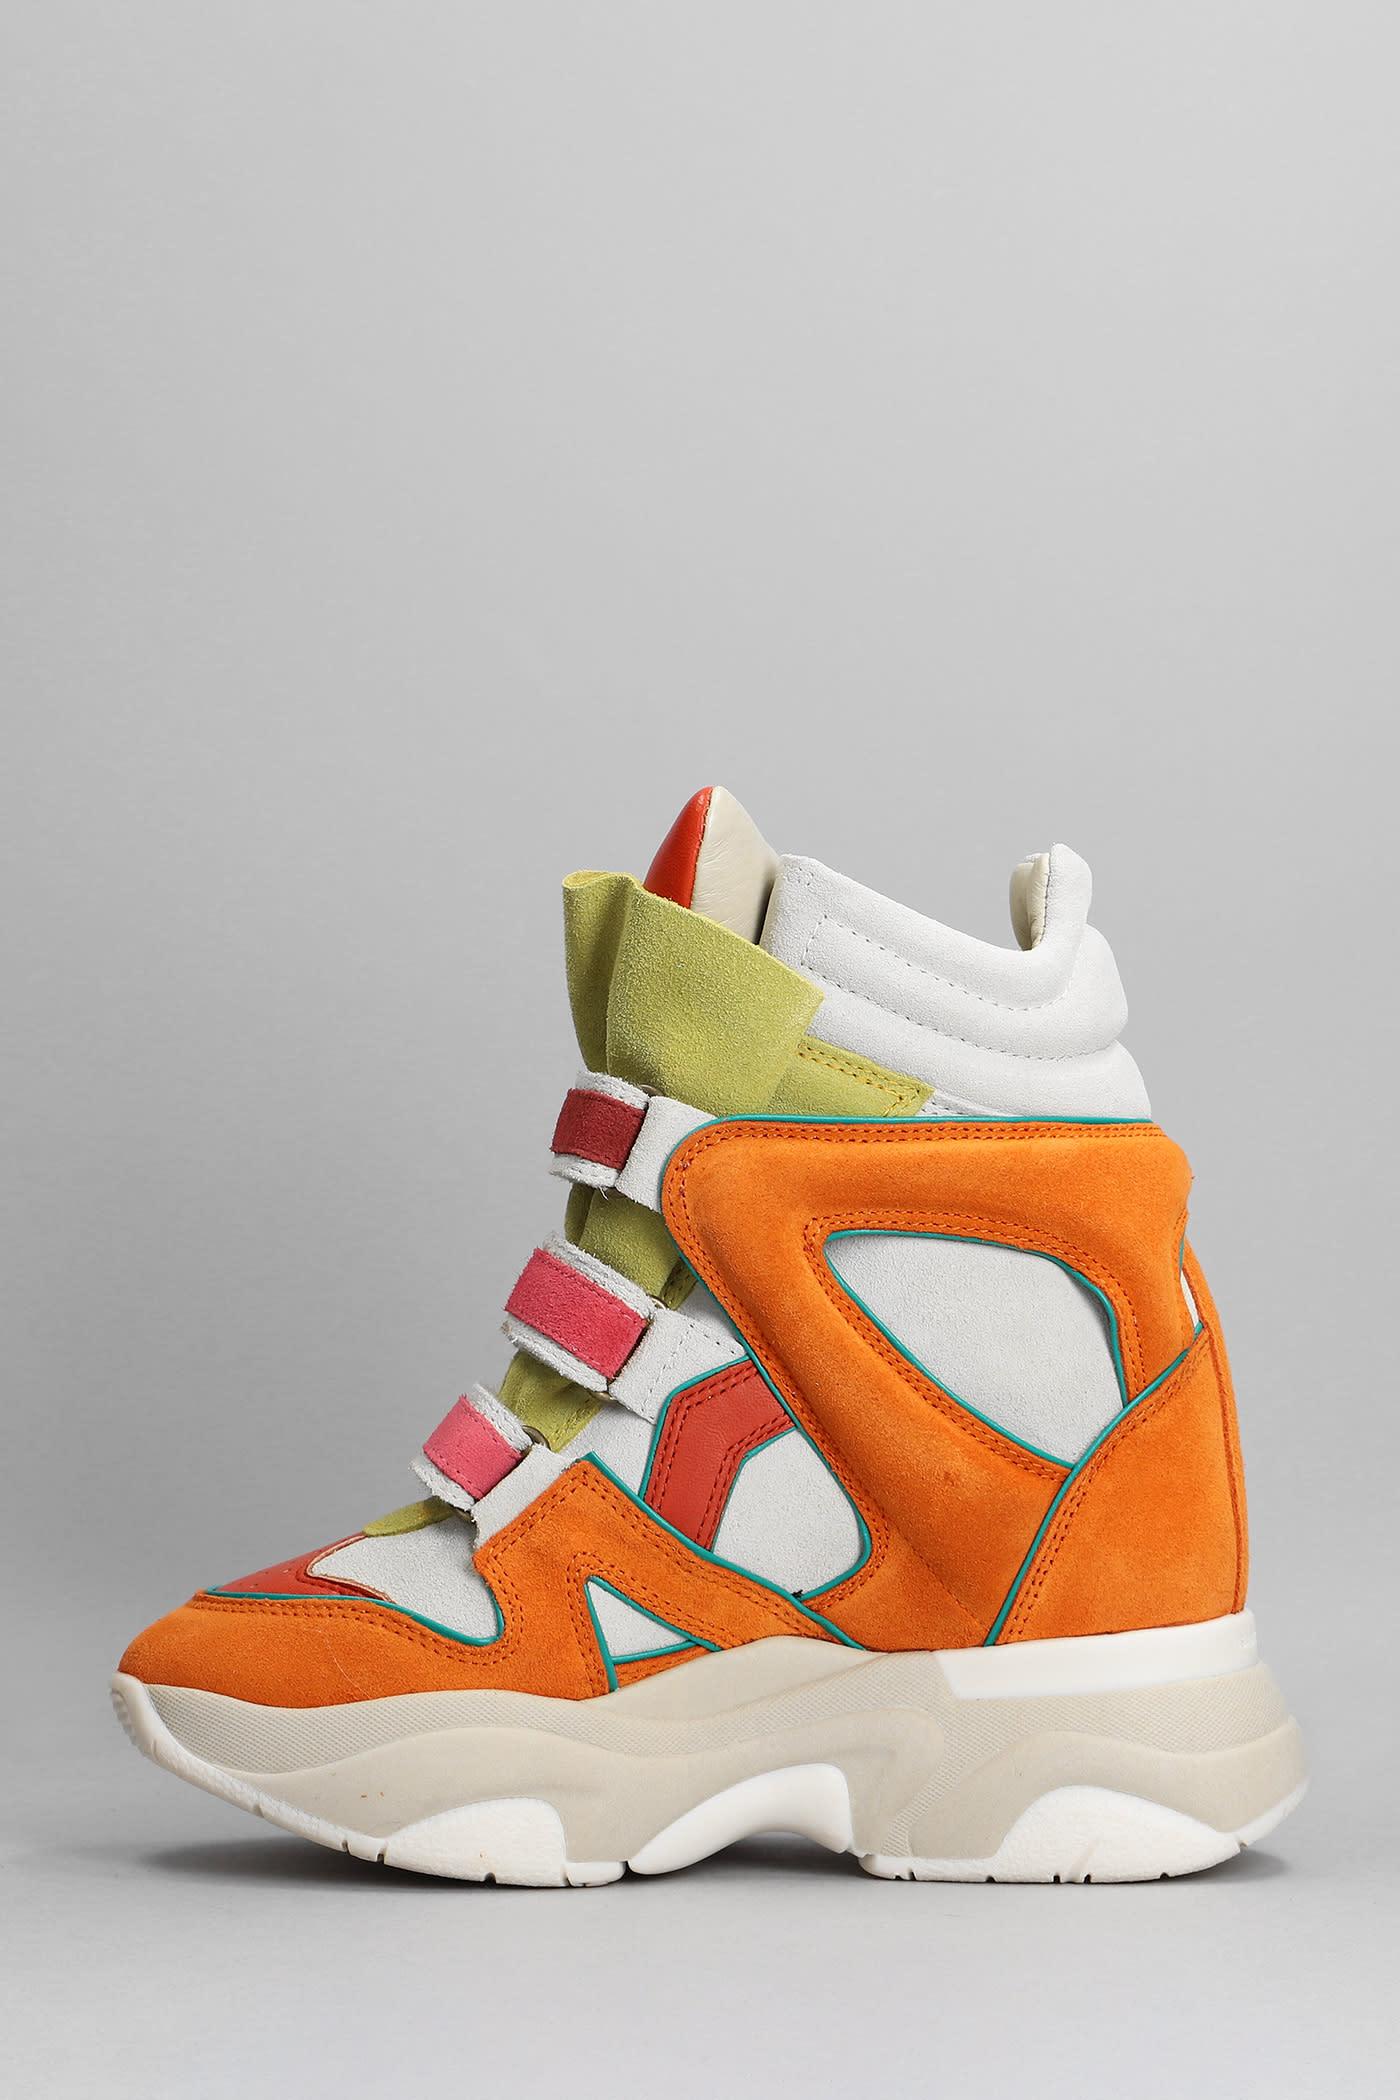 Isabel Marant Balskee Sneakers In Orange Suede And Leather | Lyst